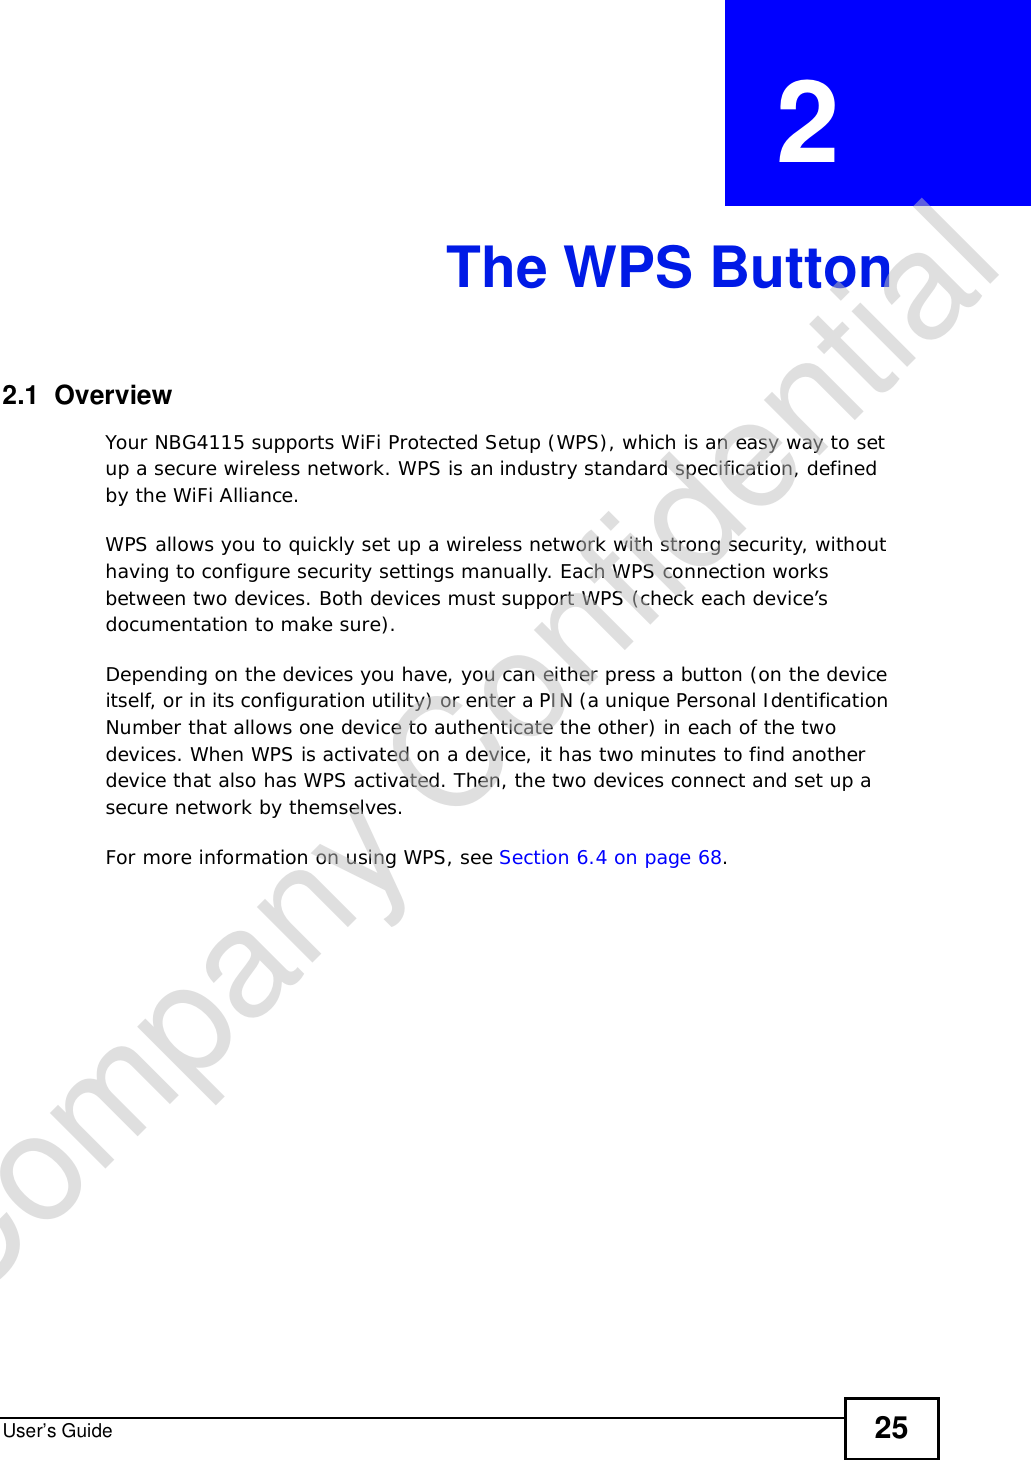 User’s Guide 25CHAPTER  2 The WPS Button2.1  OverviewYour NBG4115 supports WiFi Protected Setup (WPS), which is an easy way to set up a secure wireless network. WPS is an industry standard specification, defined by the WiFi Alliance.WPS allows you to quickly set up a wireless network with strong security, without having to configure security settings manually. Each WPS connection works between two devices. Both devices must support WPS (check each device’s documentation to make sure). Depending on the devices you have, you can either press a button (on the device itself, or in its configuration utility) or enter a PIN (a unique Personal Identification Number that allows one device to authenticate the other) in each of the two devices. When WPS is activated on a device, it has two minutes to find another device that also has WPS activated. Then, the two devices connect and set up a secure network by themselves.For more information on using WPS, see Section 6.4 on page 68.Company Confidential